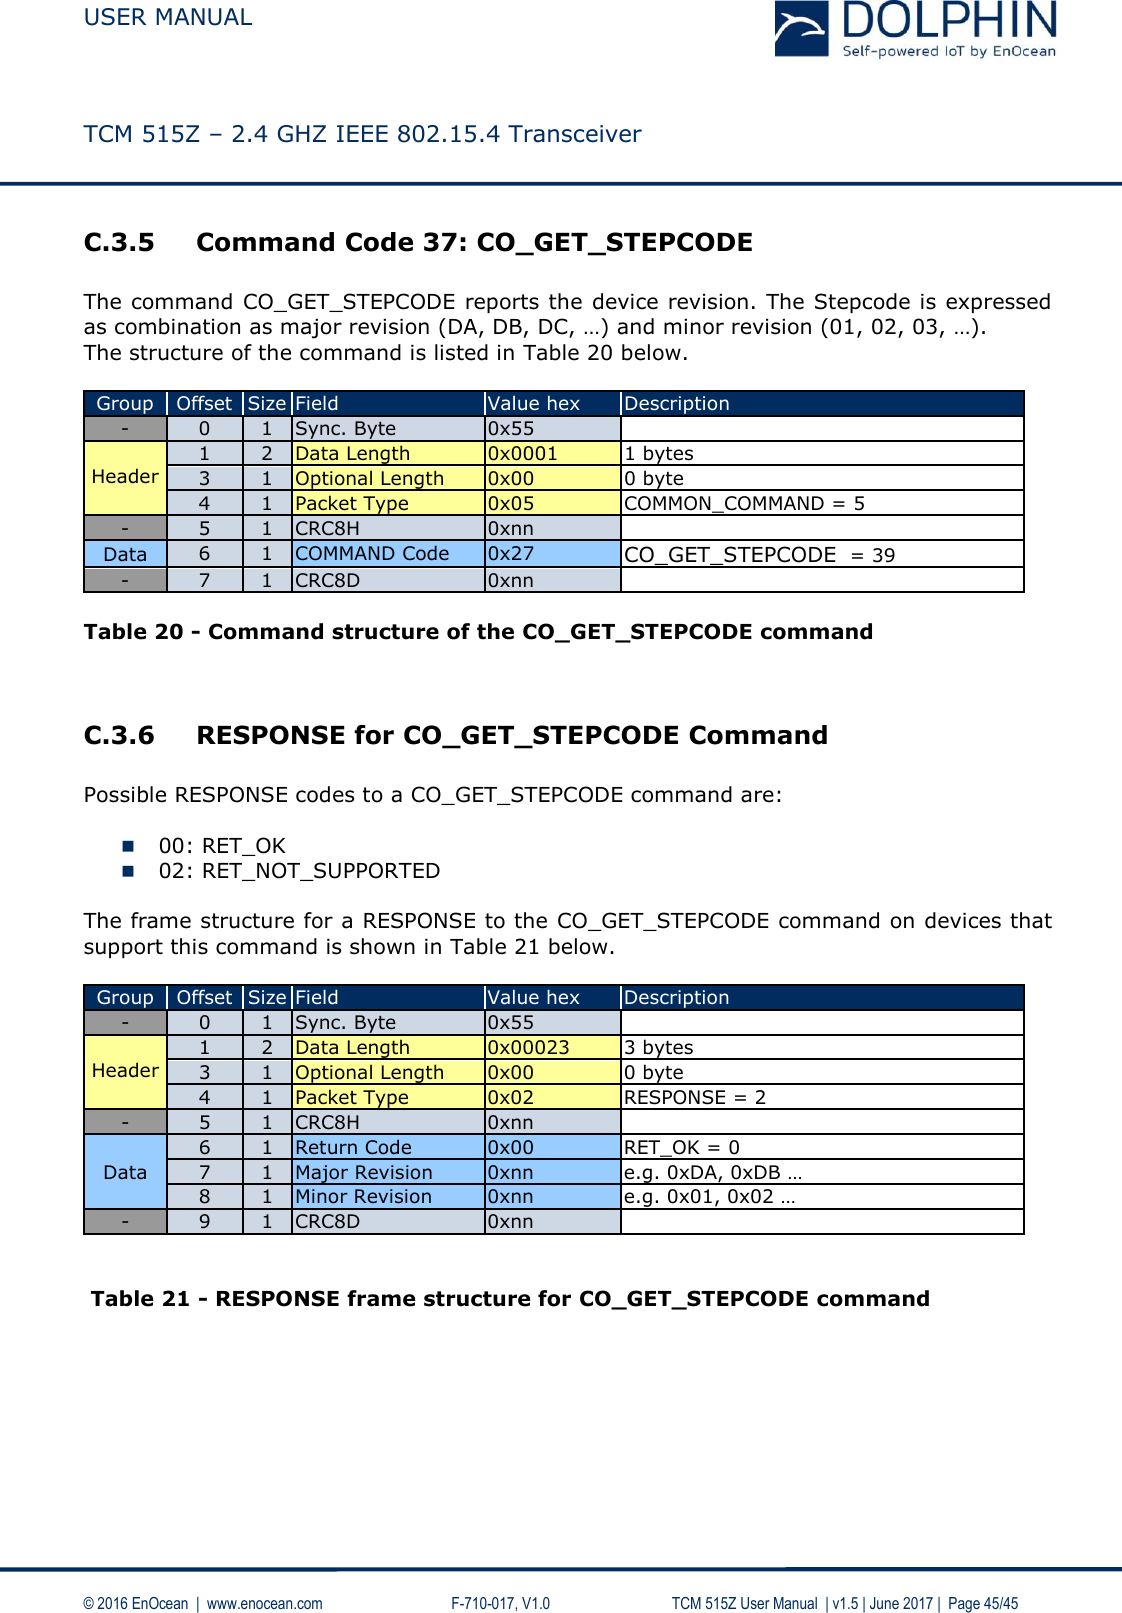  USER MANUAL    TCM 515Z – 2.4 GHZ IEEE 802.15.4 Transceiver   © 2016 EnOcean  |  www.enocean.com     F-710-017, V1.0        TCM 515Z User Manual  | v1.5 | June 2017 |  Page 45/45 C.3.5 Command Code 37: CO_GET_STEPCODE  The command CO_GET_STEPCODE reports the device revision. The Stepcode is expressed as combination as major revision (DA, DB, DC, …) and minor revision (01, 02, 03, …). The structure of the command is listed in Table 20 below.  Group Offset Size Field Value hex Description - 0 1 Sync. Byte 0x55   Header 1 2 Data Length 0x0001 1 bytes 3 1 Optional Length 0x00 0 byte 4 1 Packet Type 0x05 COMMON_COMMAND = 5 - 5 1 CRC8H 0xnn  Data 6 1 COMMAND Code 0x27 CO_GET_STEPCODE  = 39 - 7 1 CRC8D 0xnn    Table 20 - Command structure of the CO_GET_STEPCODE command   C.3.6 RESPONSE for CO_GET_STEPCODE Command  Possible RESPONSE codes to a CO_GET_STEPCODE command are:   00: RET_OK  02: RET_NOT_SUPPORTED  The frame structure for a RESPONSE to the CO_GET_STEPCODE command on devices that support this command is shown in Table 21 below.  Group Offset Size Field Value hex Description - 0 1 Sync. Byte 0x55   Header 1 2 Data Length 0x00023 3 bytes 3 1 Optional Length 0x00 0 byte 4 1 Packet Type 0x02 RESPONSE = 2 - 5 1 CRC8H 0xnn  Data 6 1 Return Code 0x00 RET_OK = 0 7 1 Major Revision 0xnn e.g. 0xDA, 0xDB …  8 1 Minor Revision 0xnn e.g. 0x01, 0x02 … - 9 1 CRC8D 0xnn     Table 21 - RESPONSE frame structure for CO_GET_STEPCODE command   